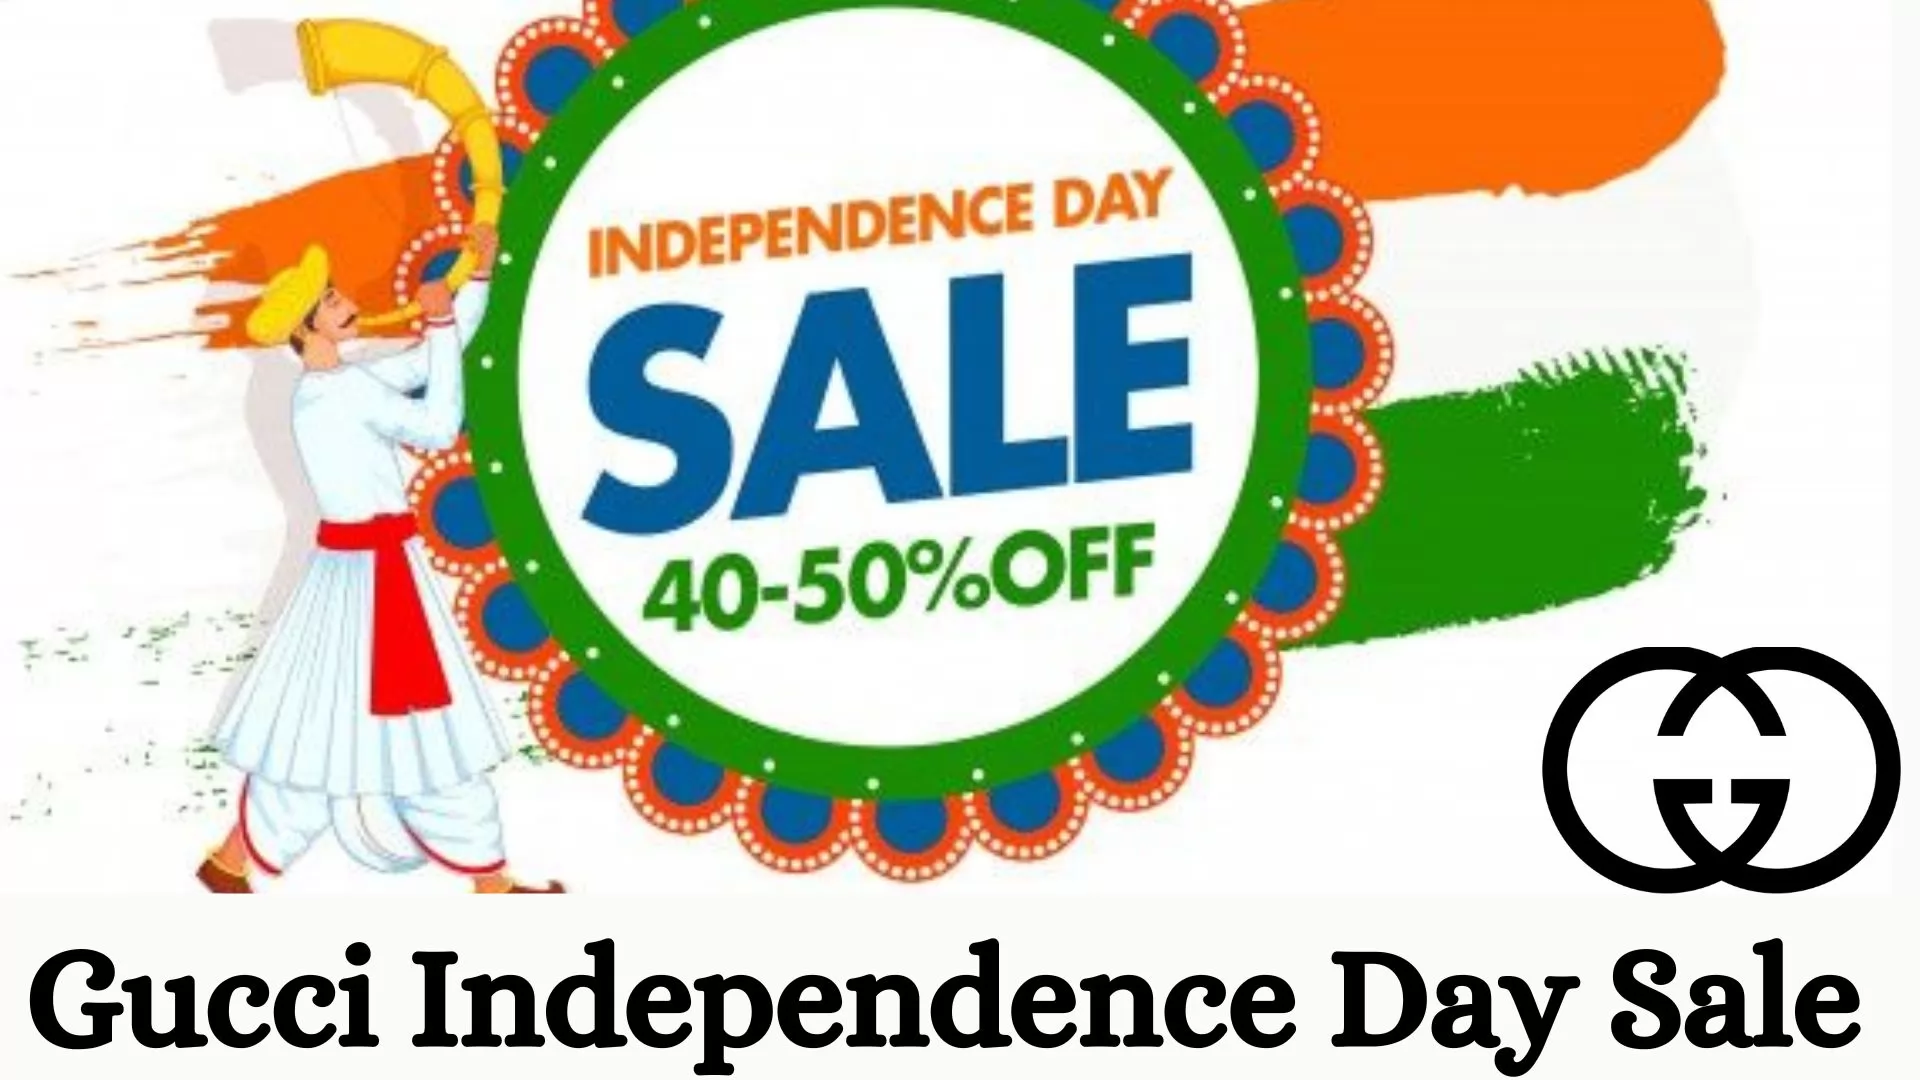 Gucci Independence Day Sale